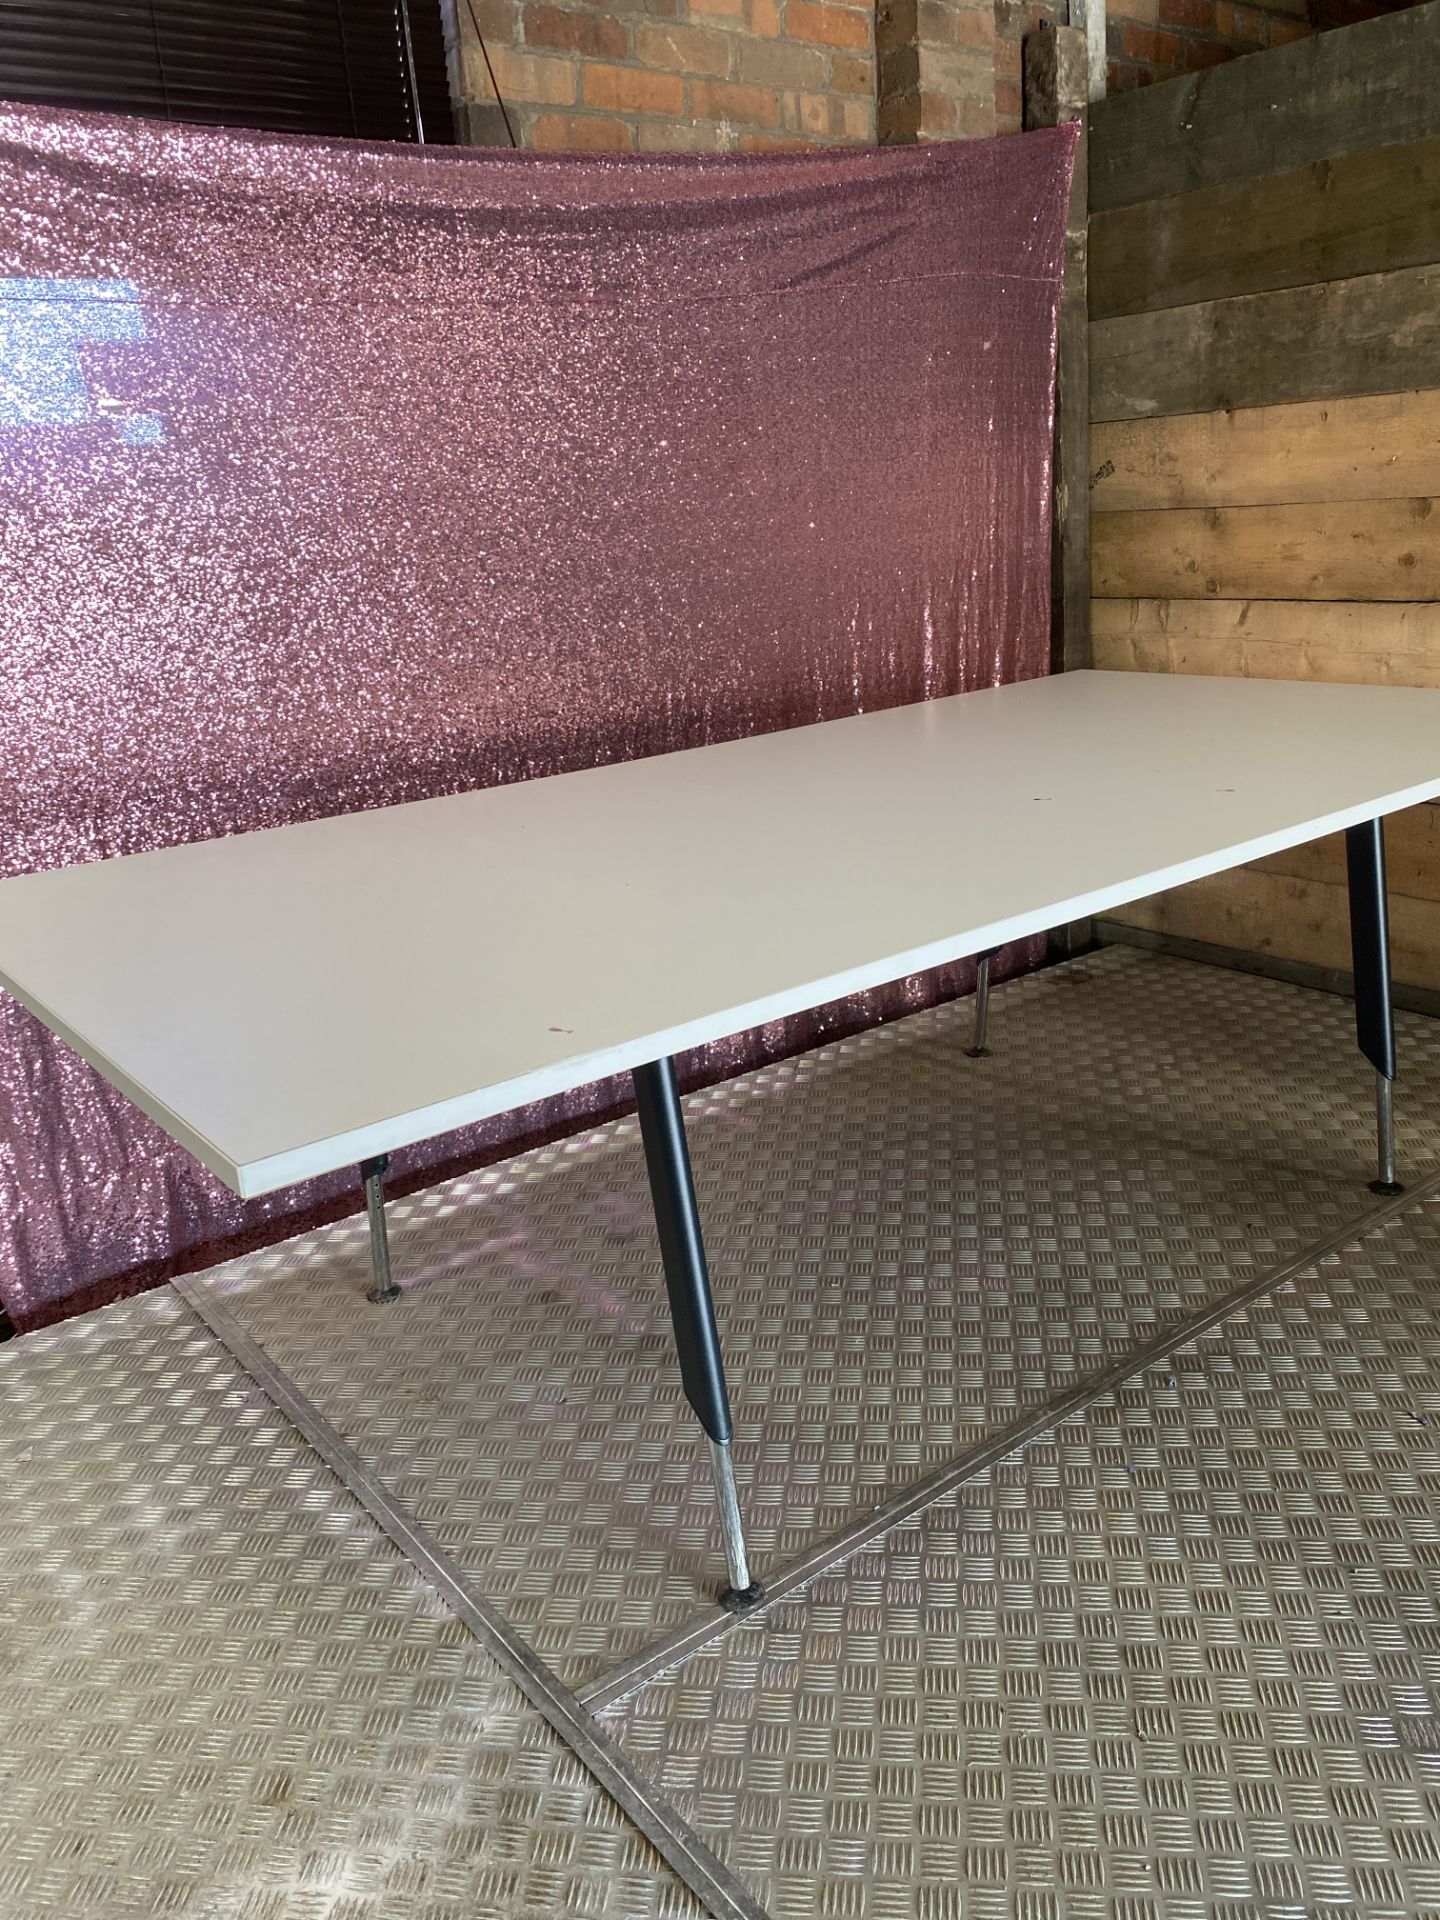 Large Rectangular Table with Pink Cloth